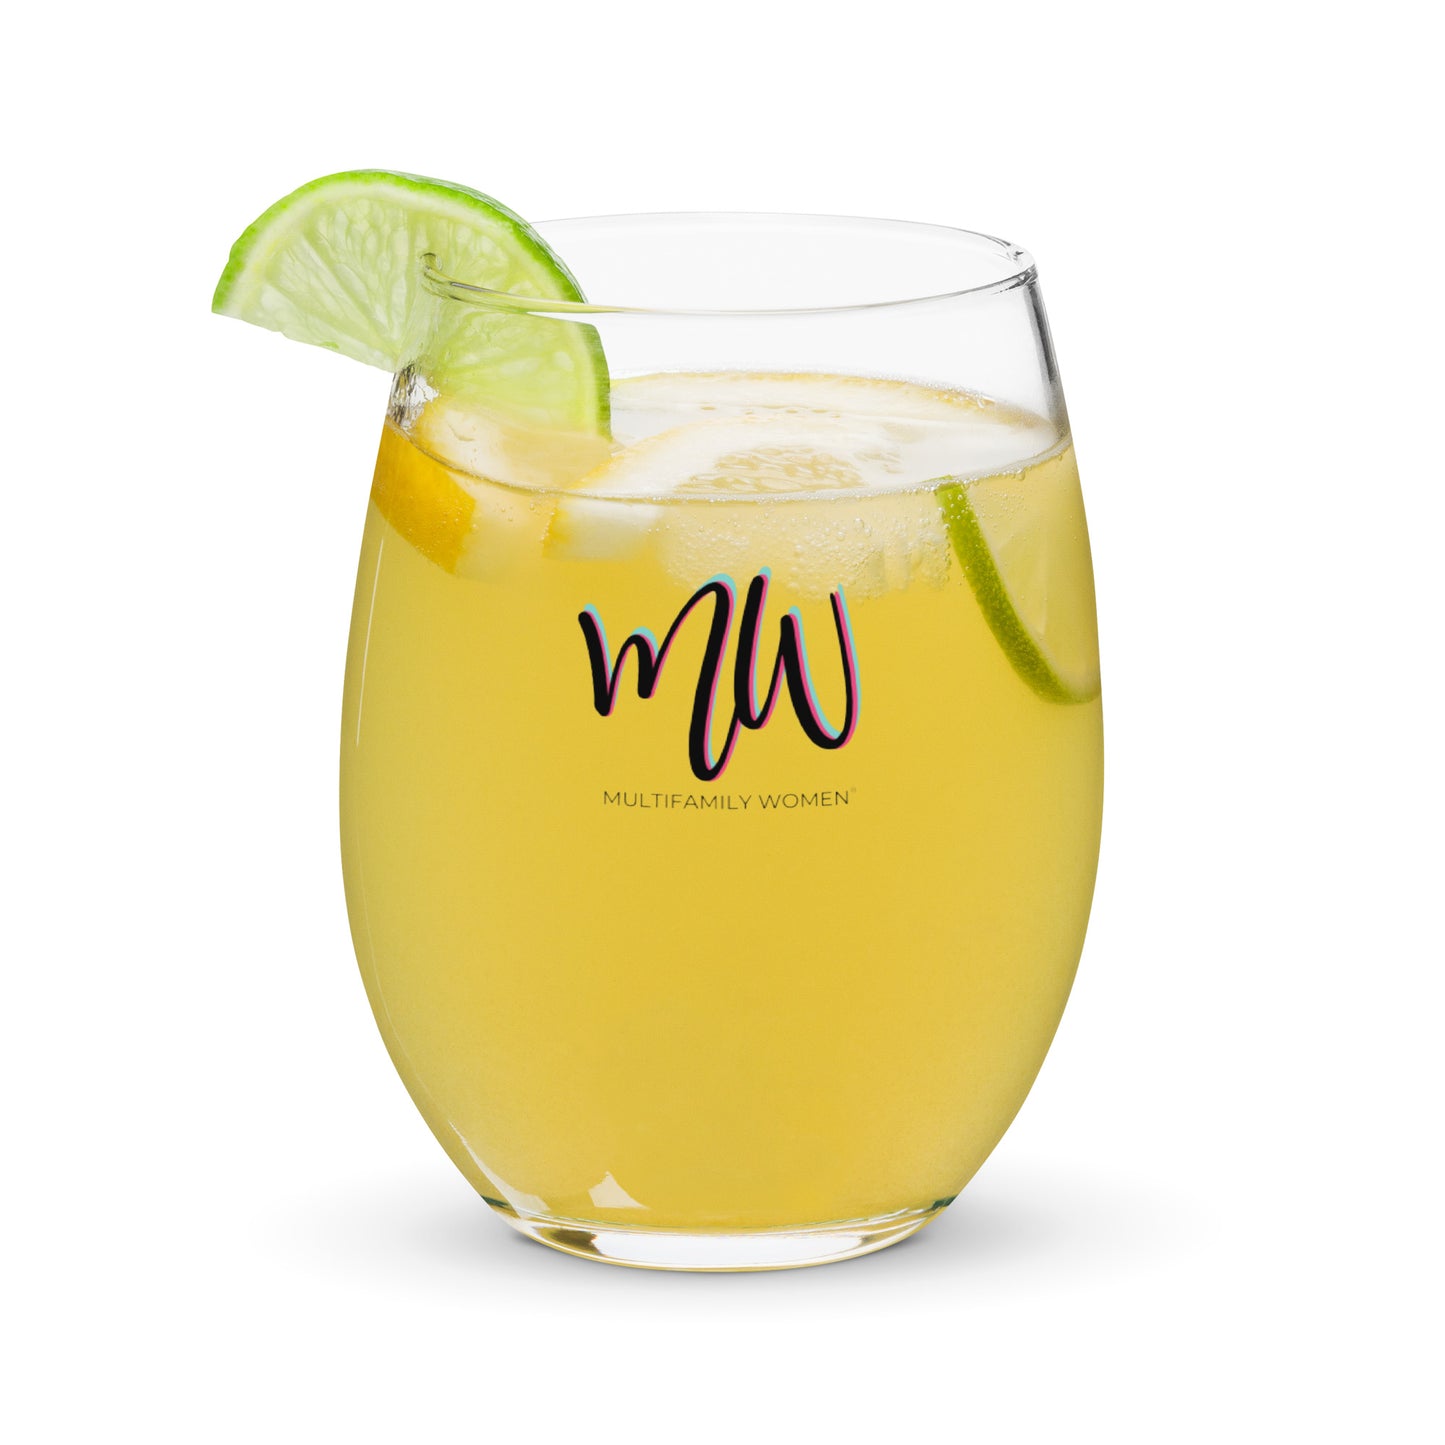 The Drink Diva - Stemless Wine Glass by Multifamily Women®